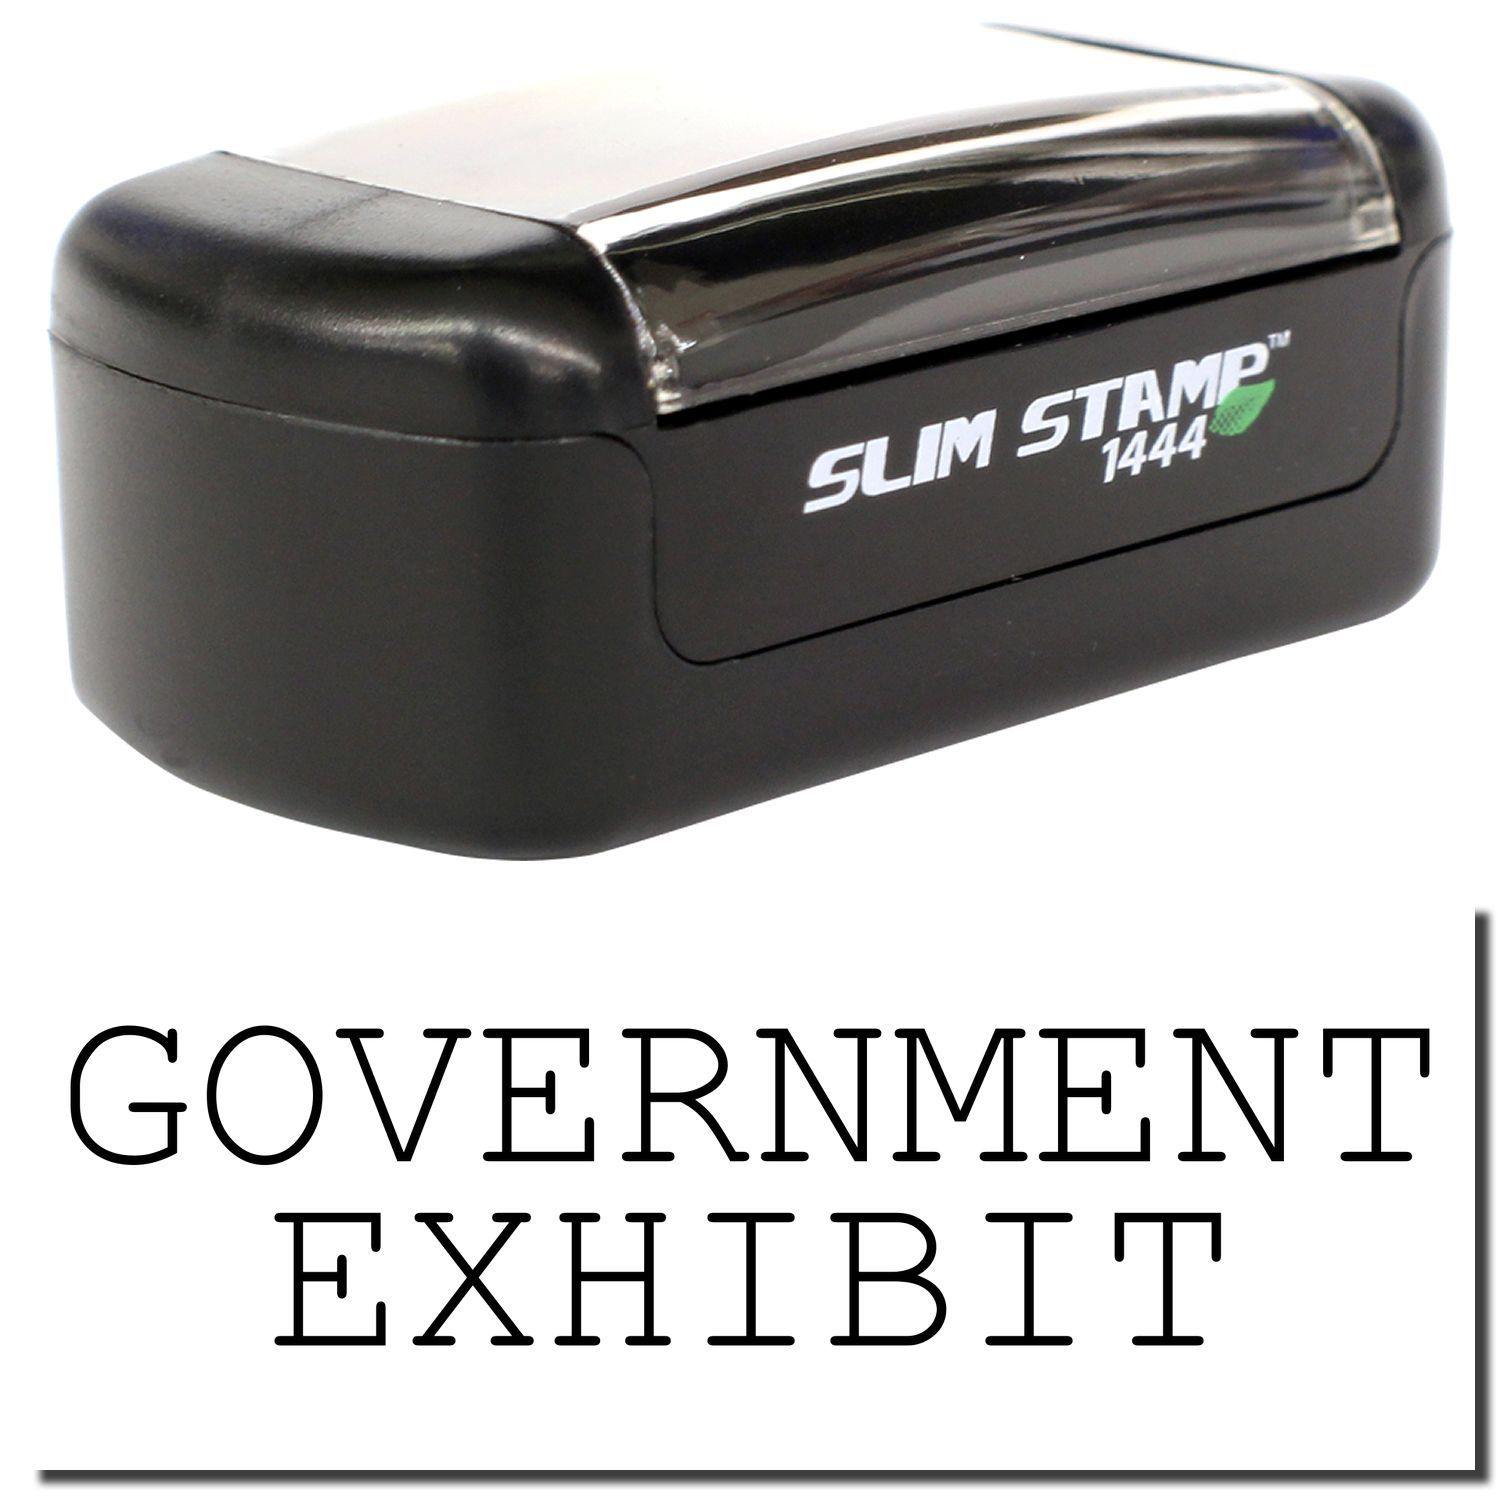 A stock office pre-inked stamp with a stamped image showing how the text "GOVERNMENT EXHIBIT" is displayed after stamping.